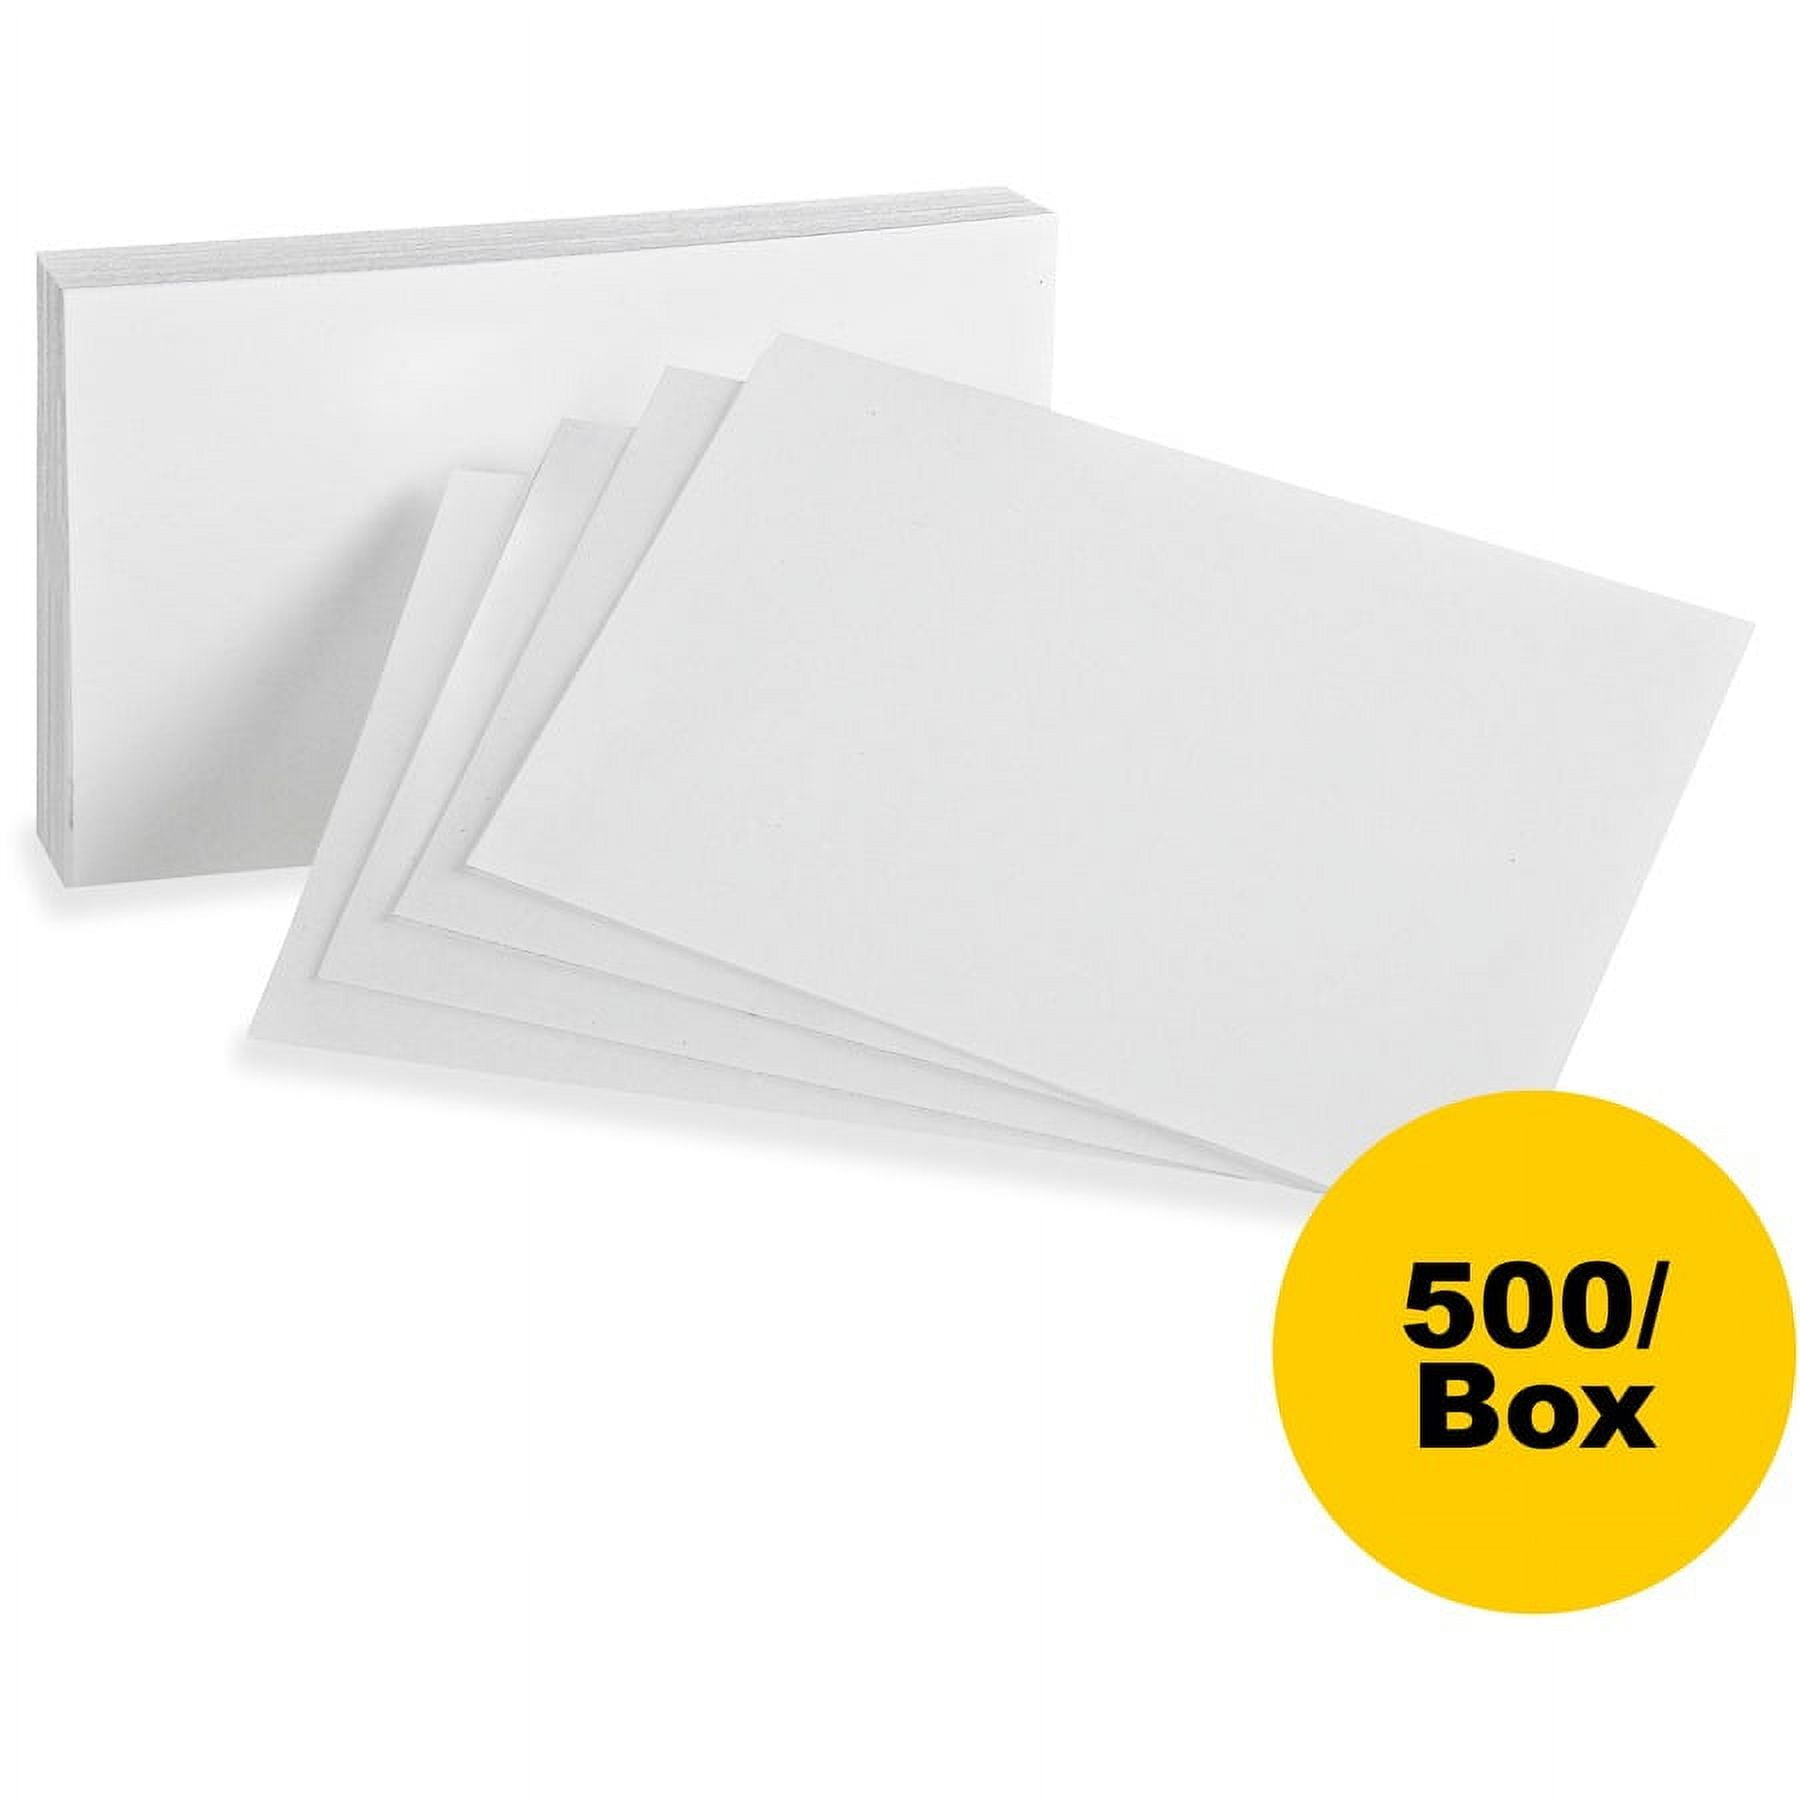 200-Pack Cardstock Paper 4x6 in, 110lb Thick, Heavyweight Card Stock Blank  Index Cards for Flashcards, Recipe Cards, Save the Date, DIY Postcards